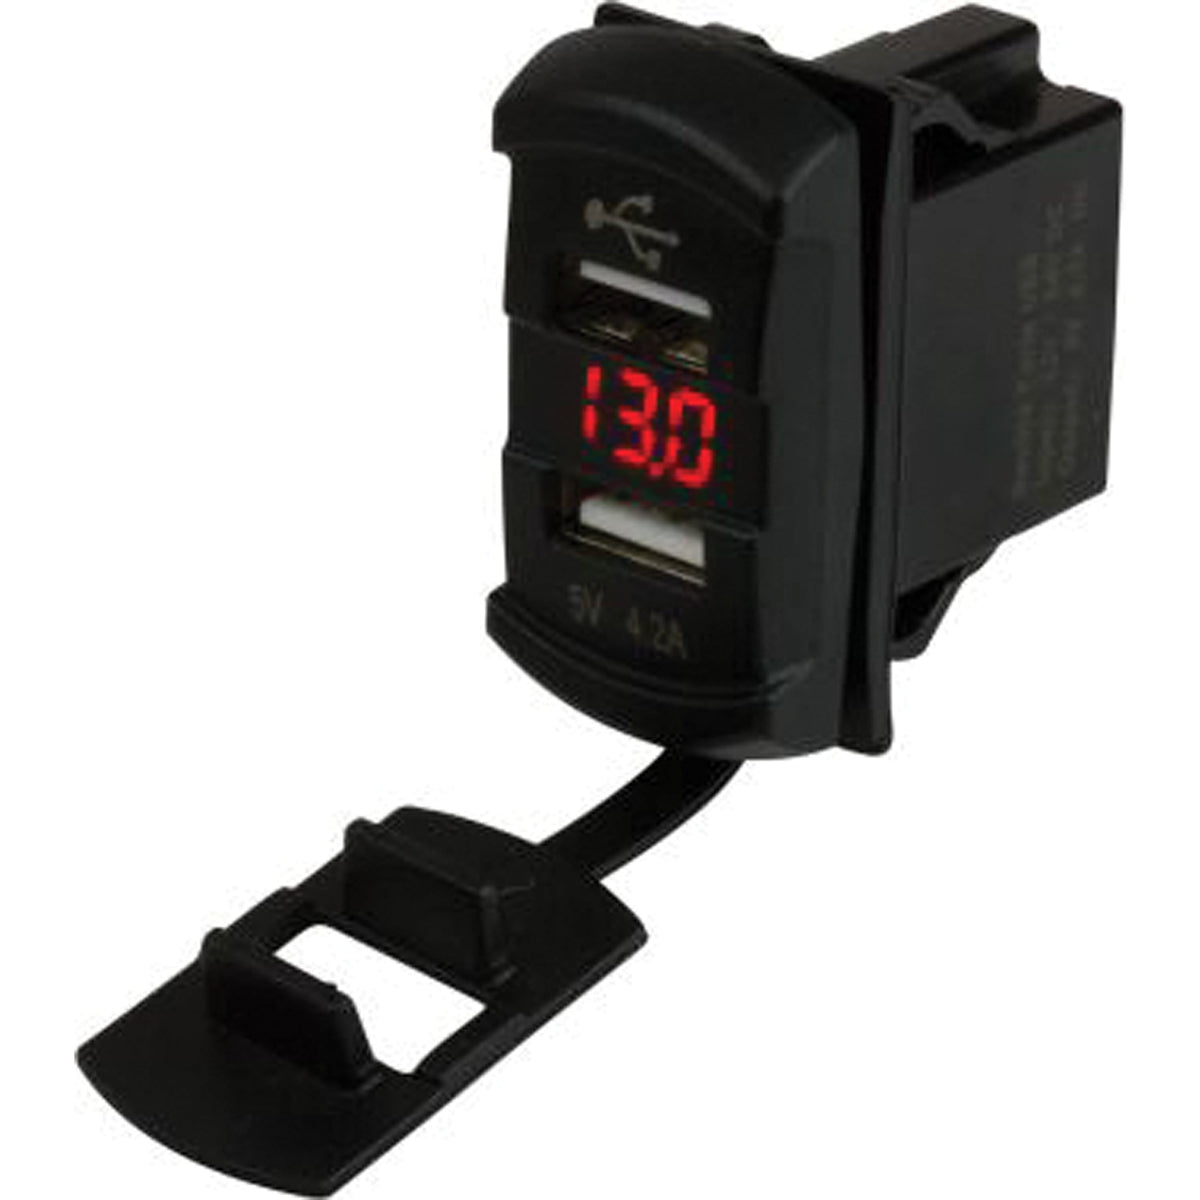 Sea-Dog Qualifies for Free Shipping Sea-Dog Dual USB Rocker Switch Voltmeter with Hidden Display #426527